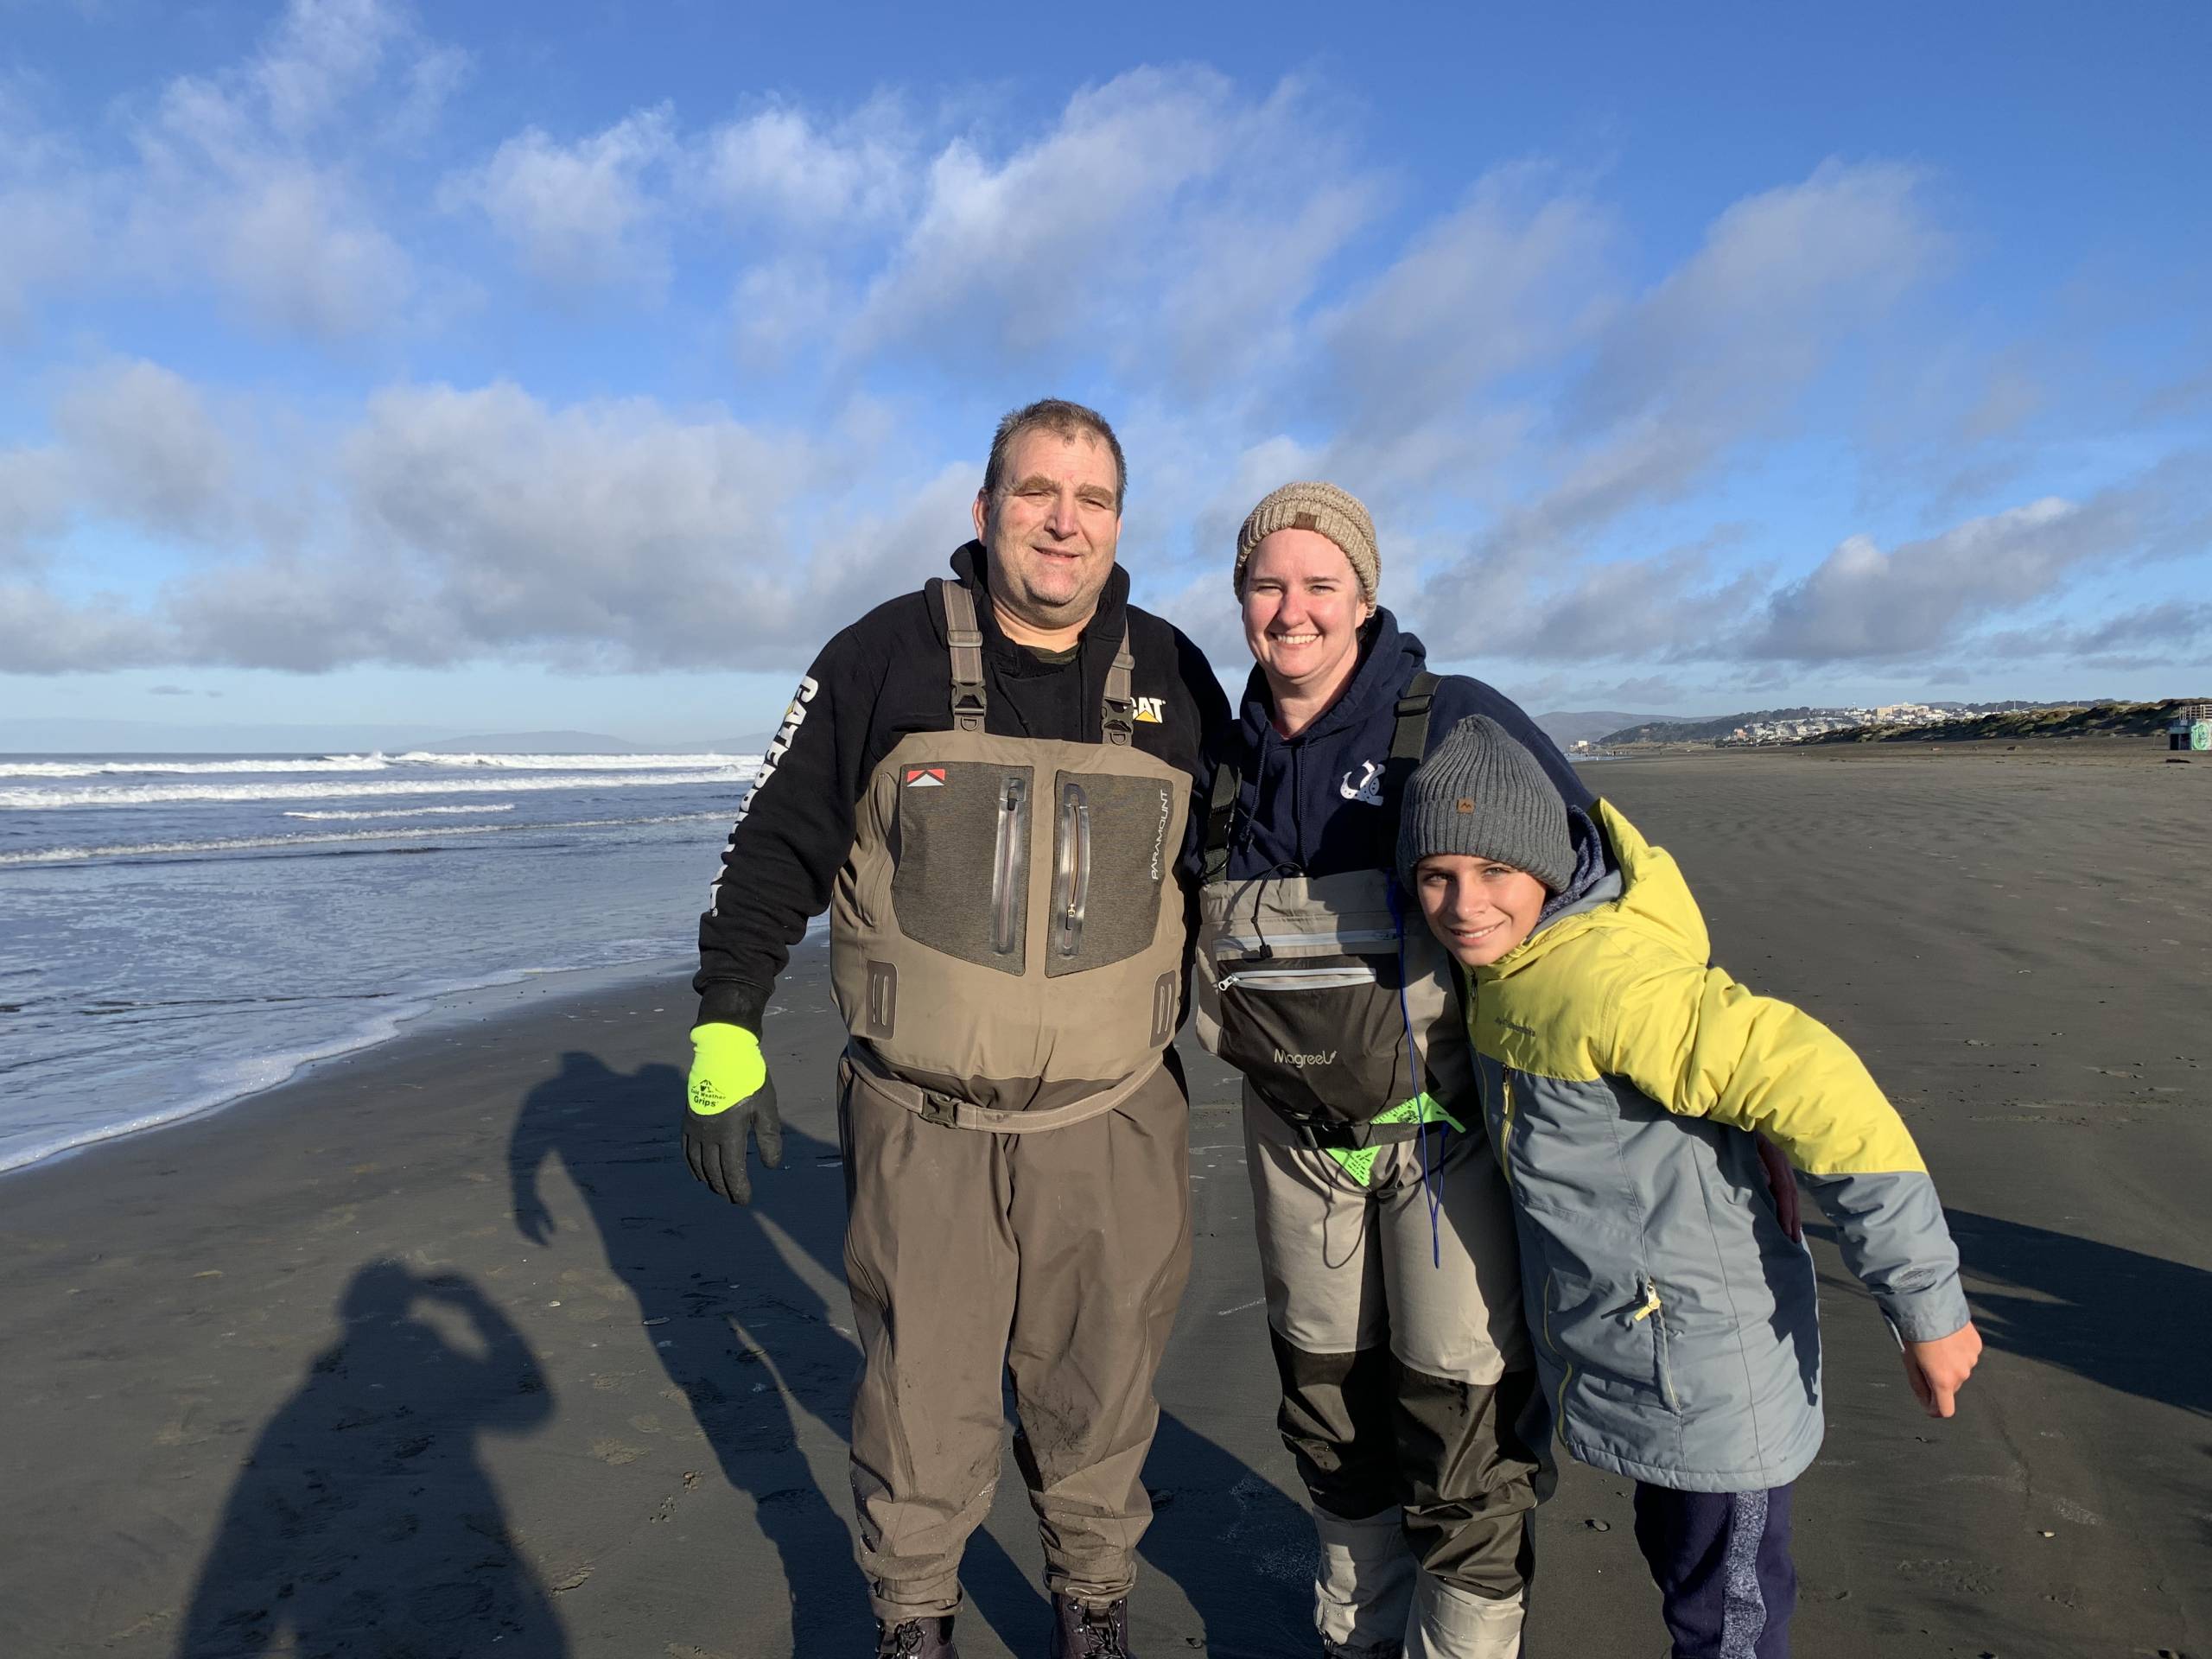 A man, woman and child smiling for the camera on a beach. They are wearing waders for fishing.